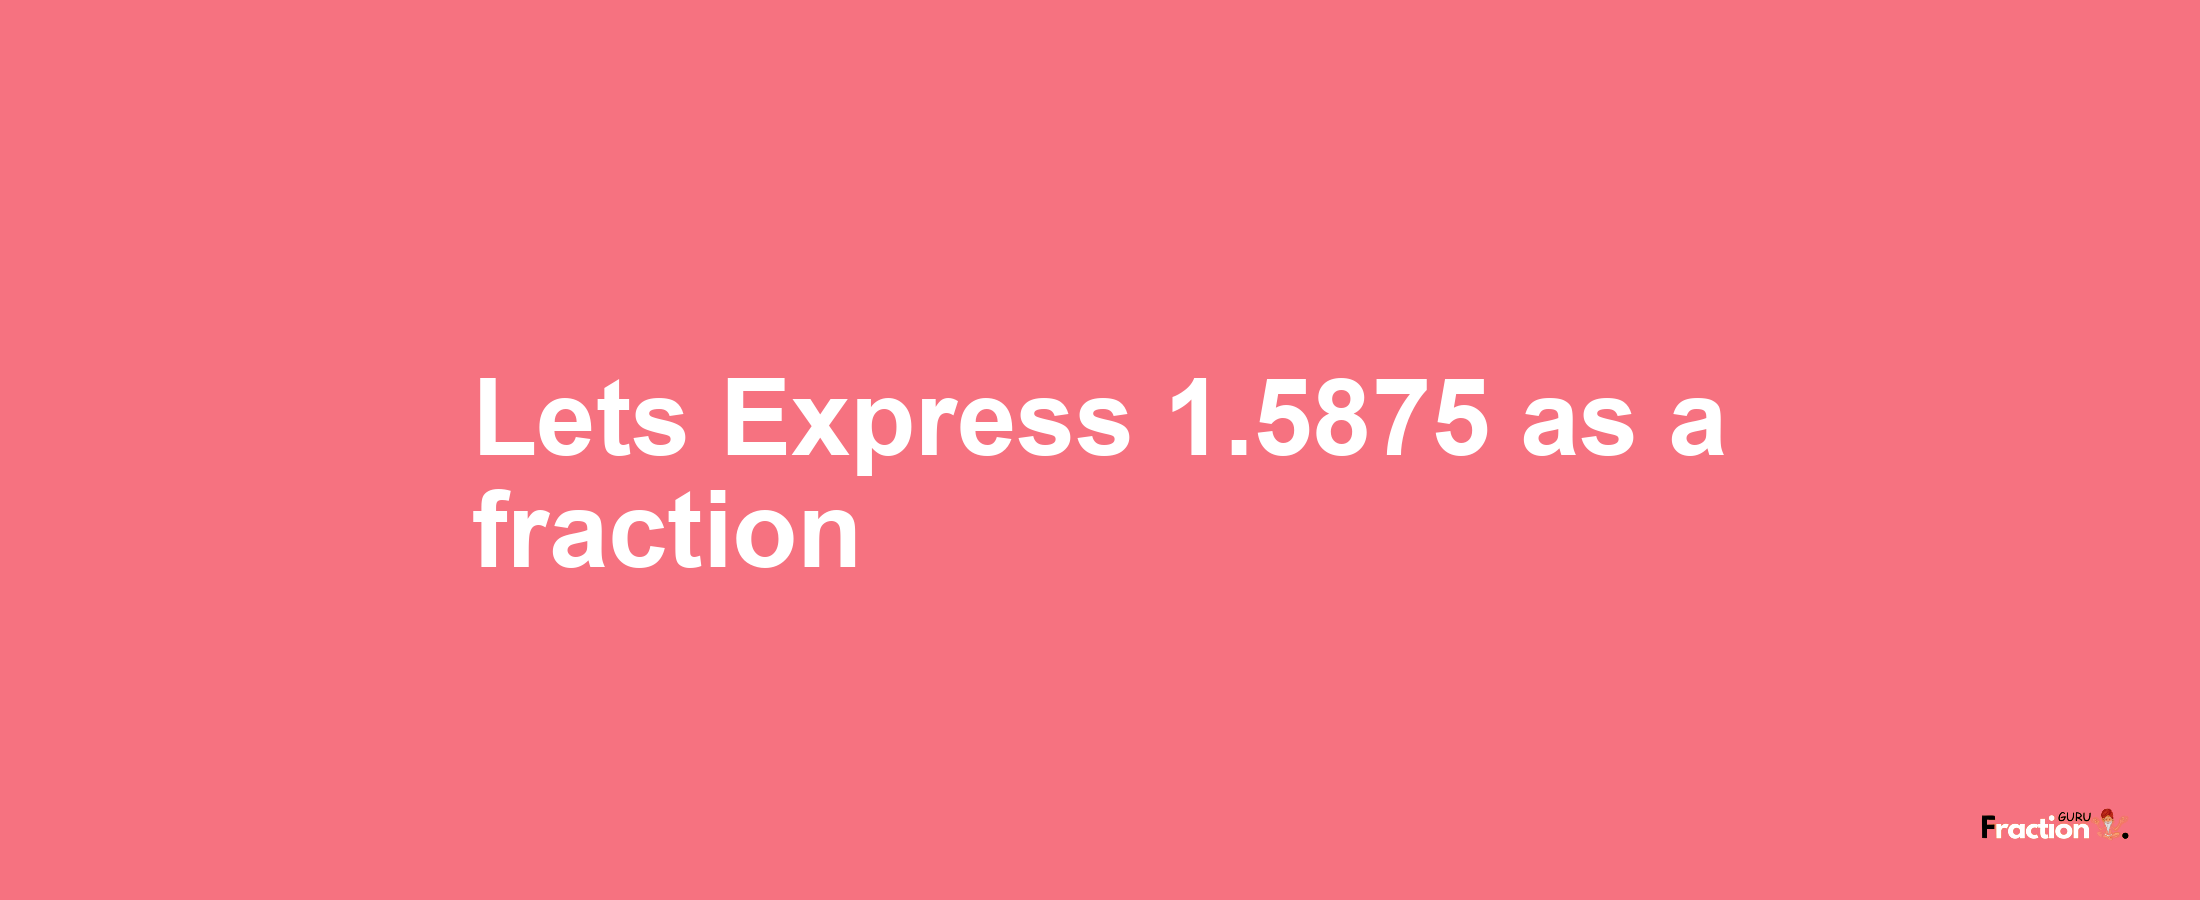 Lets Express 1.5875 as afraction